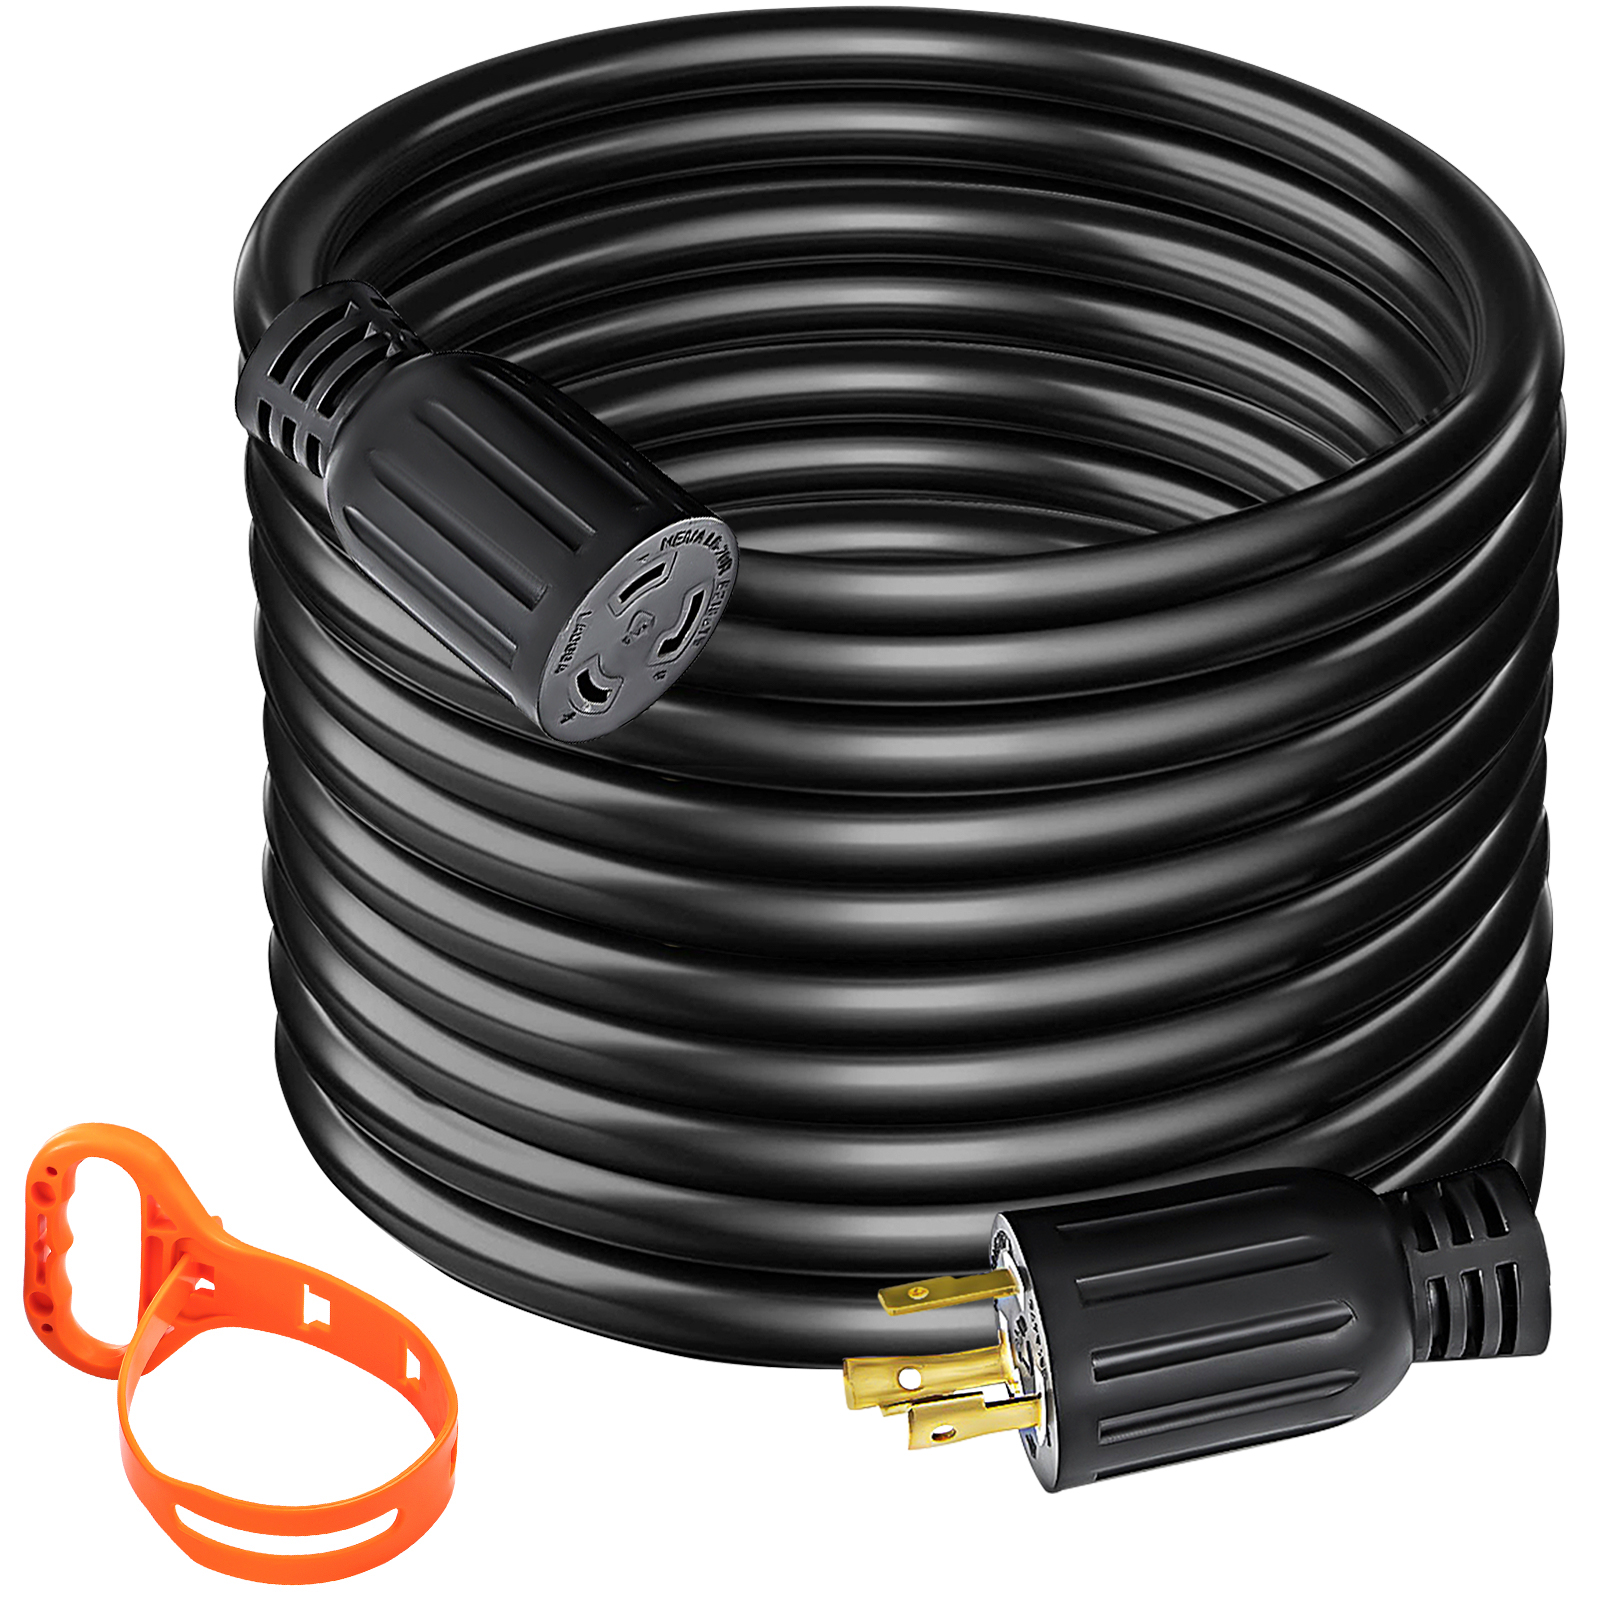 30ft Electric Hose, 8ft Pigtail Cord